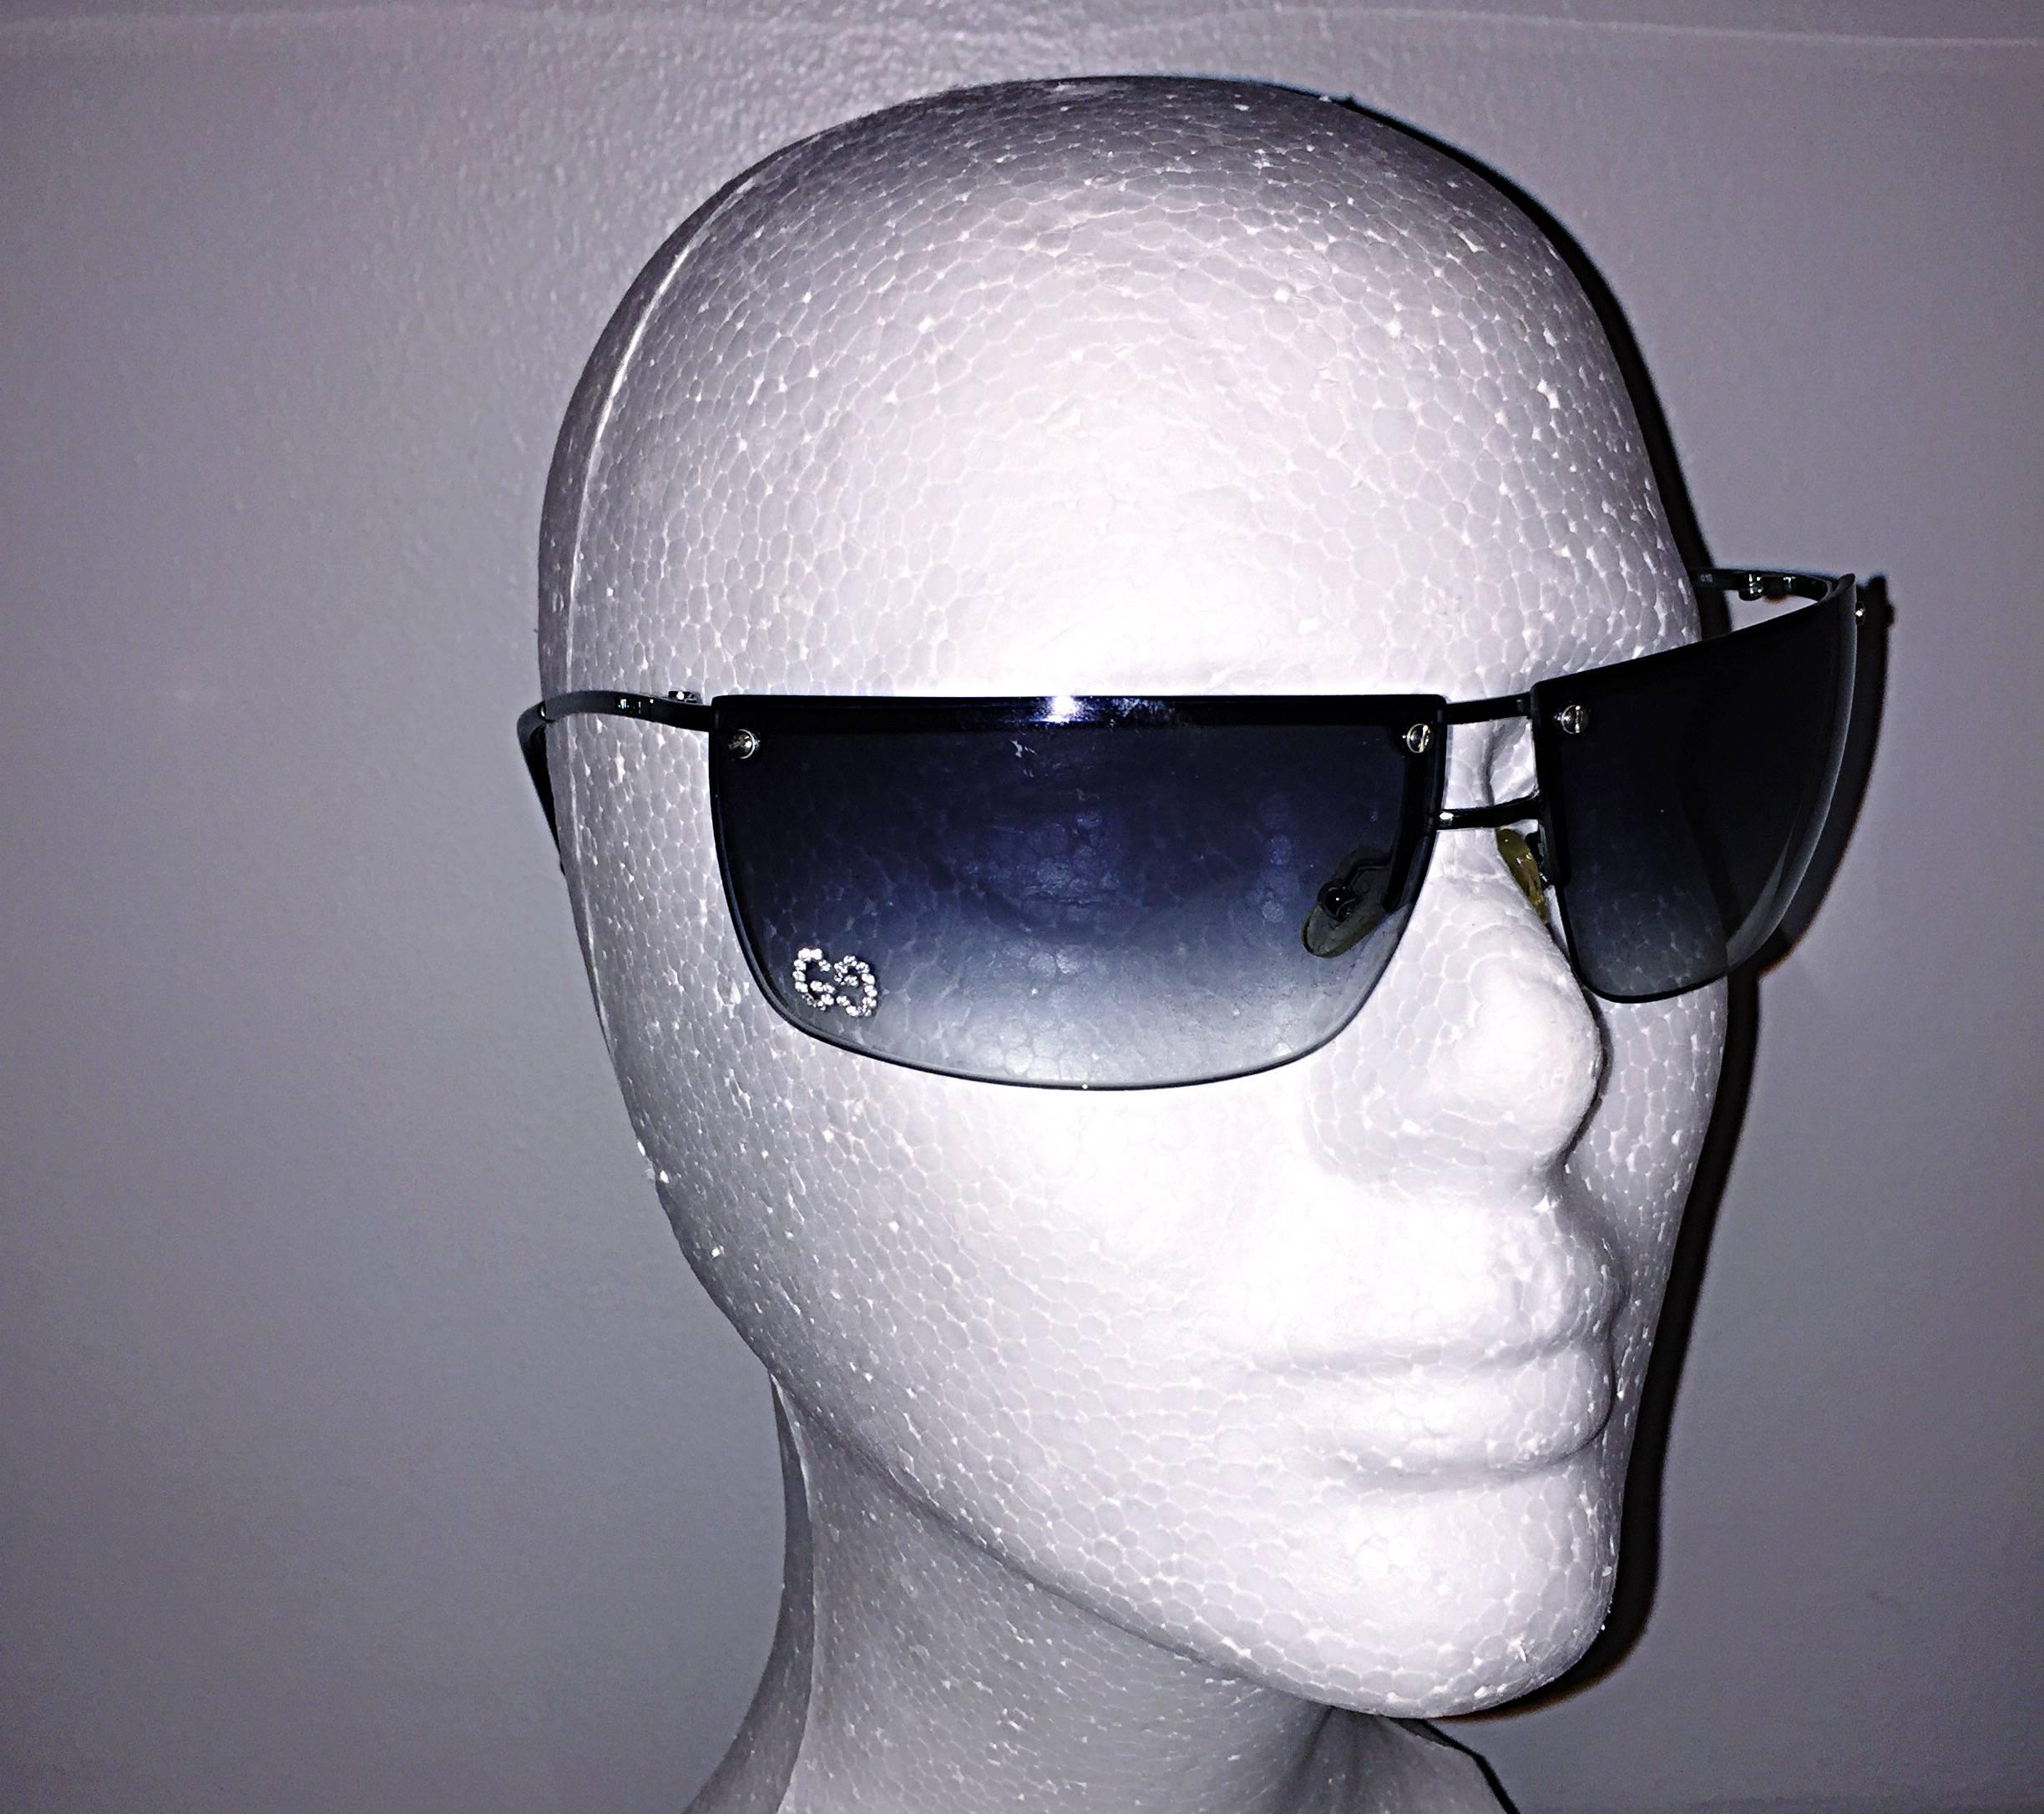 Rare TOM FORD for GUCCI late 1990s / 90s blue/gray rimless wrap around sunglasses! Features signature GG (Gucci logo) in rhinestones at right bottom corner. Looks great on any face shape. Unisex - great for a man or woman. Comfortable fit that stays